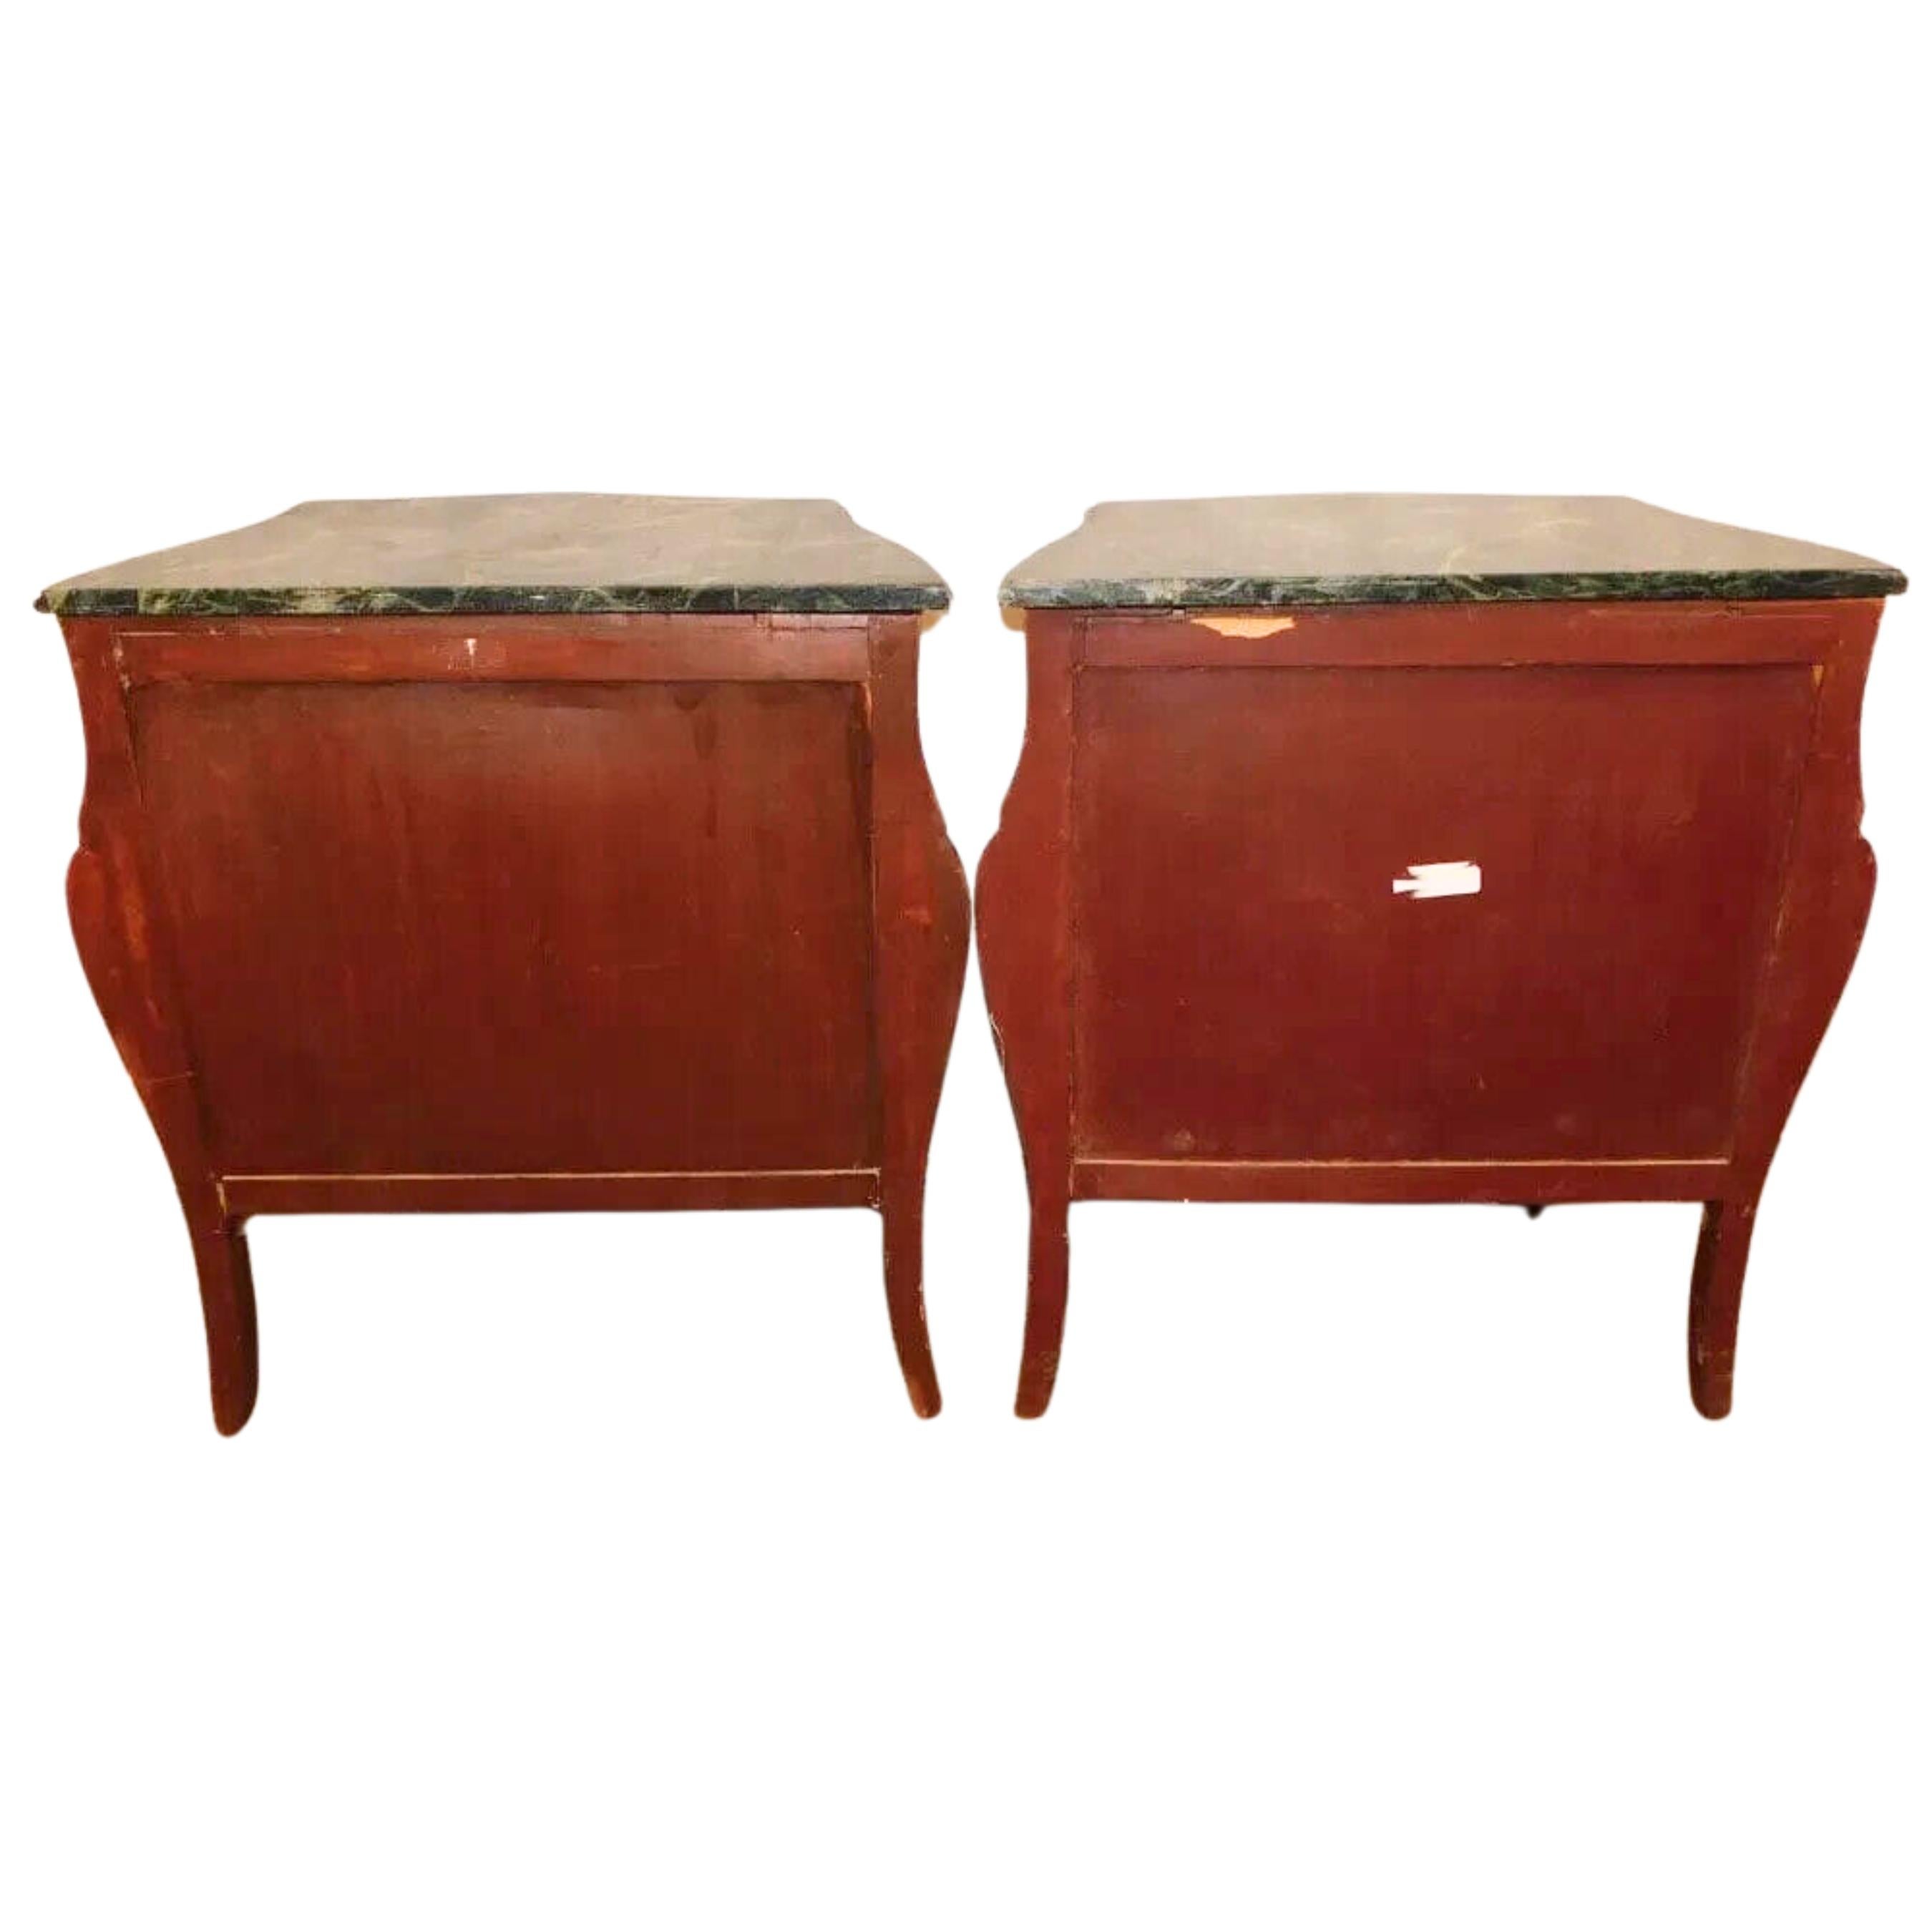 20th C. Walnut Inlay, Marble Top, Diminutive, With Bronze Commodes, Set of Two! 6